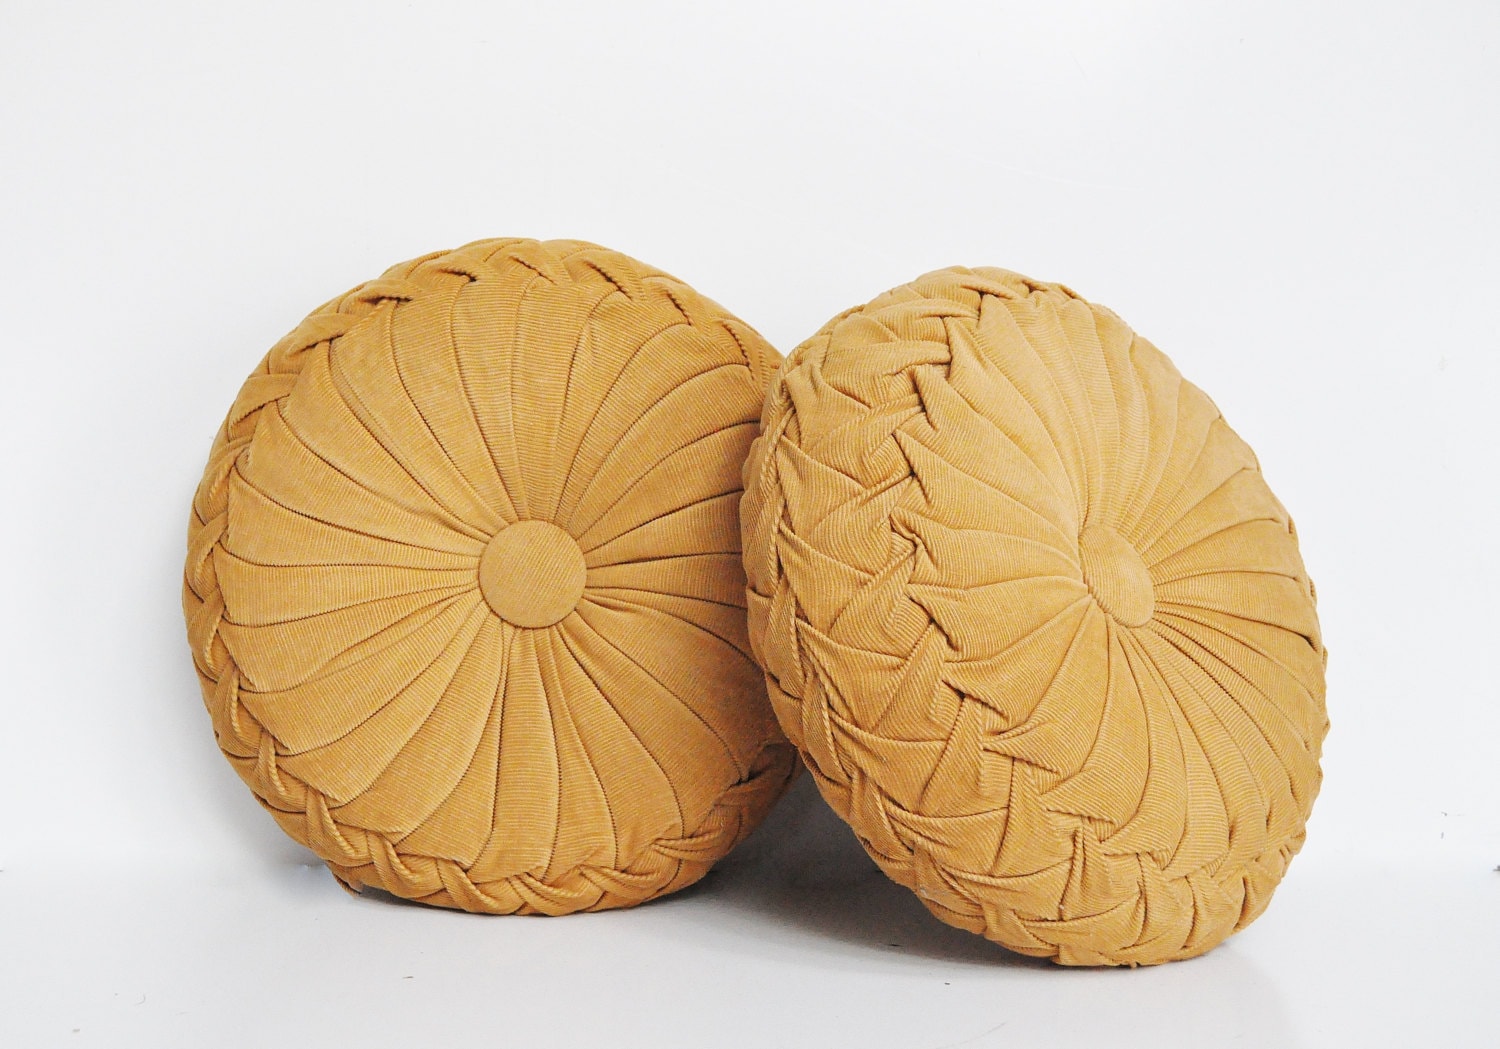 Pair of Vintage Smocked Pillows Round Pillows by thewhitepepper